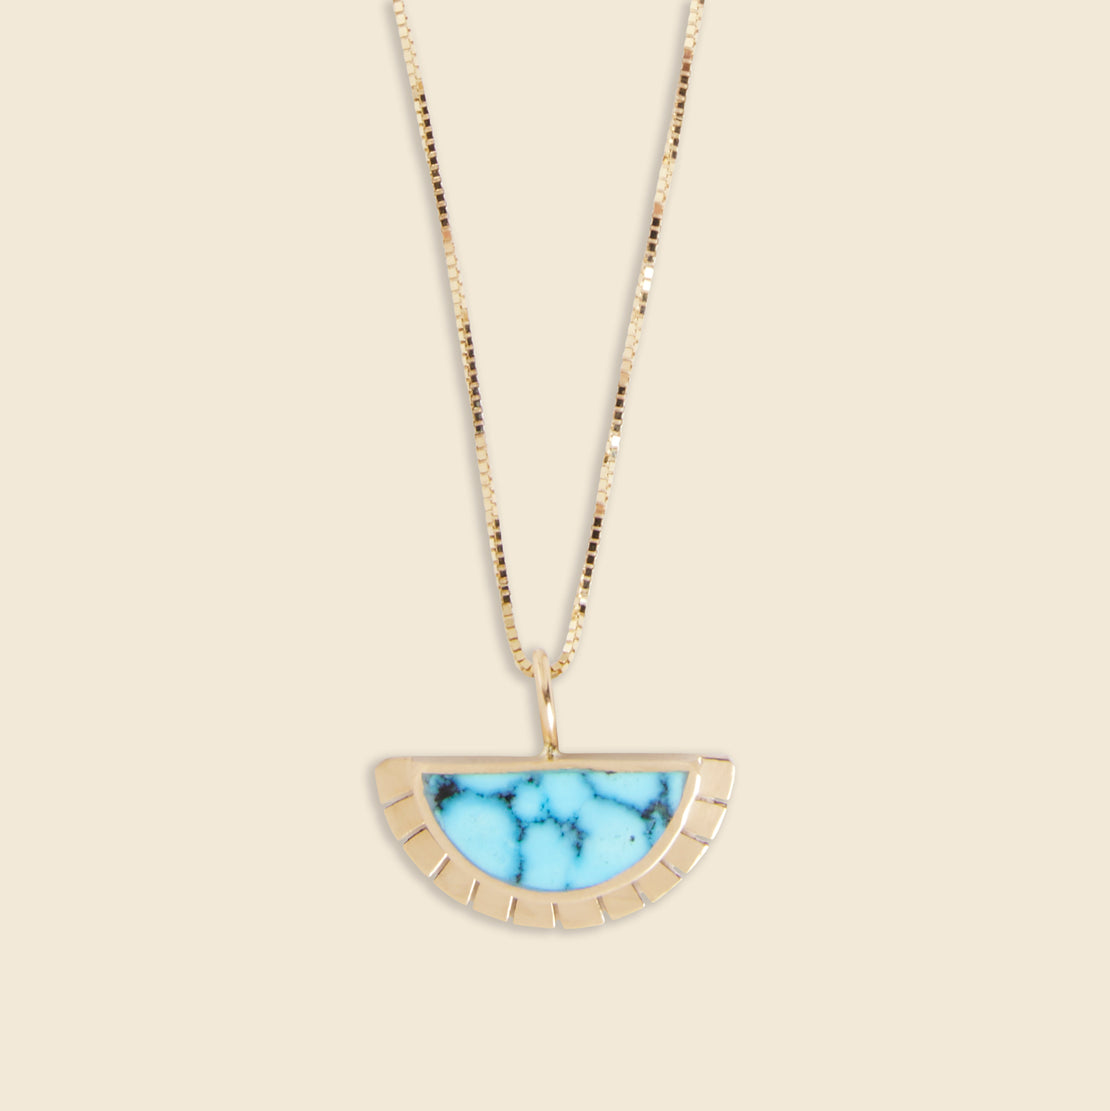 Young in the Mountains Selene Necklace - Kingman Turquoise